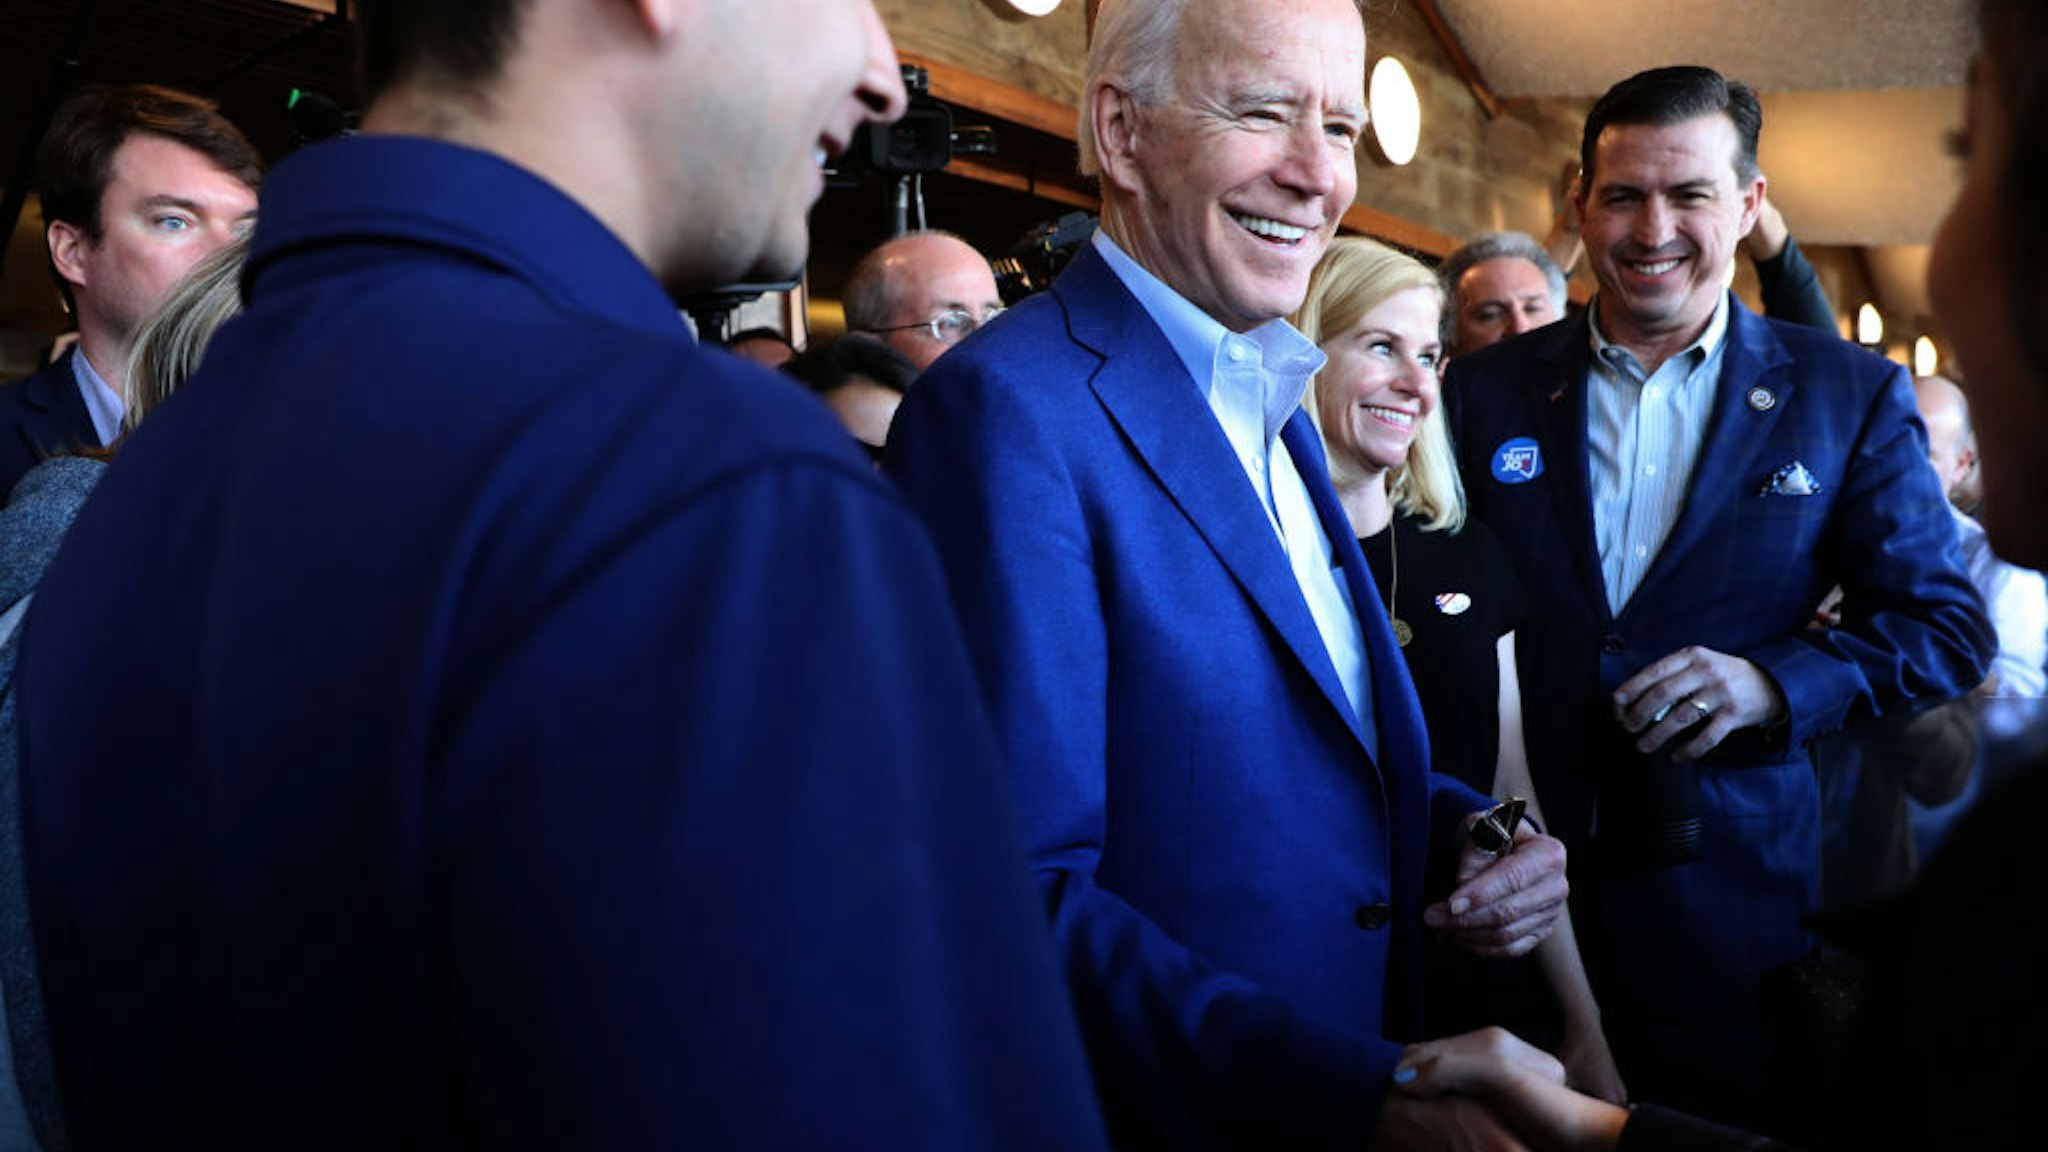 Democratic presidential candidate former Vice President Joe Biden greets patron at the Buttercup diner on March 03, 2020 in Oakland, California.